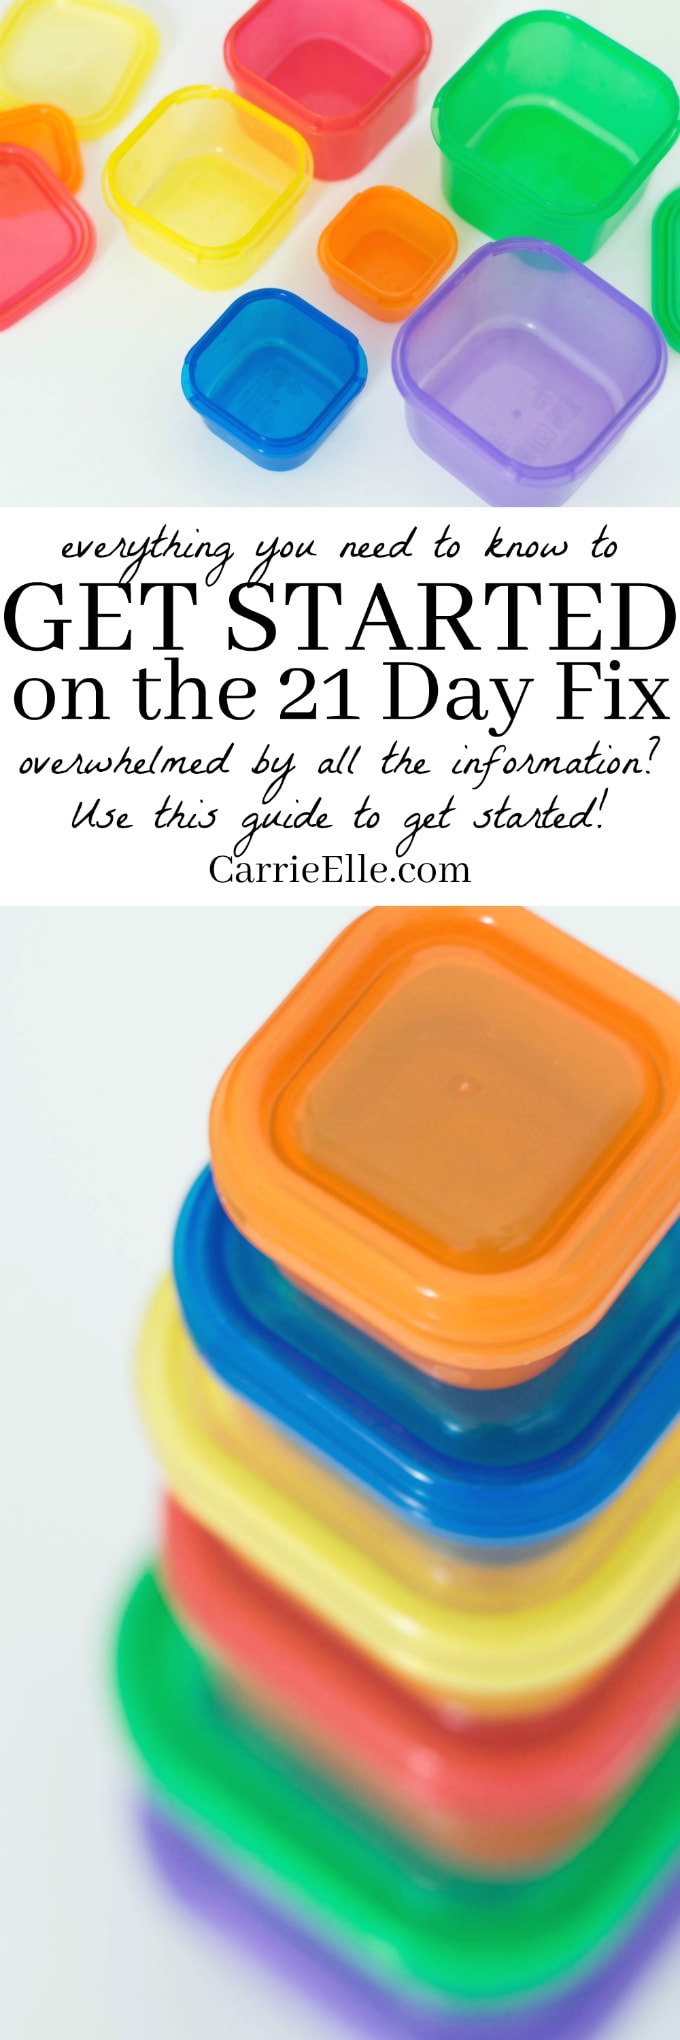 How to Get Started on the 21 Day Fix